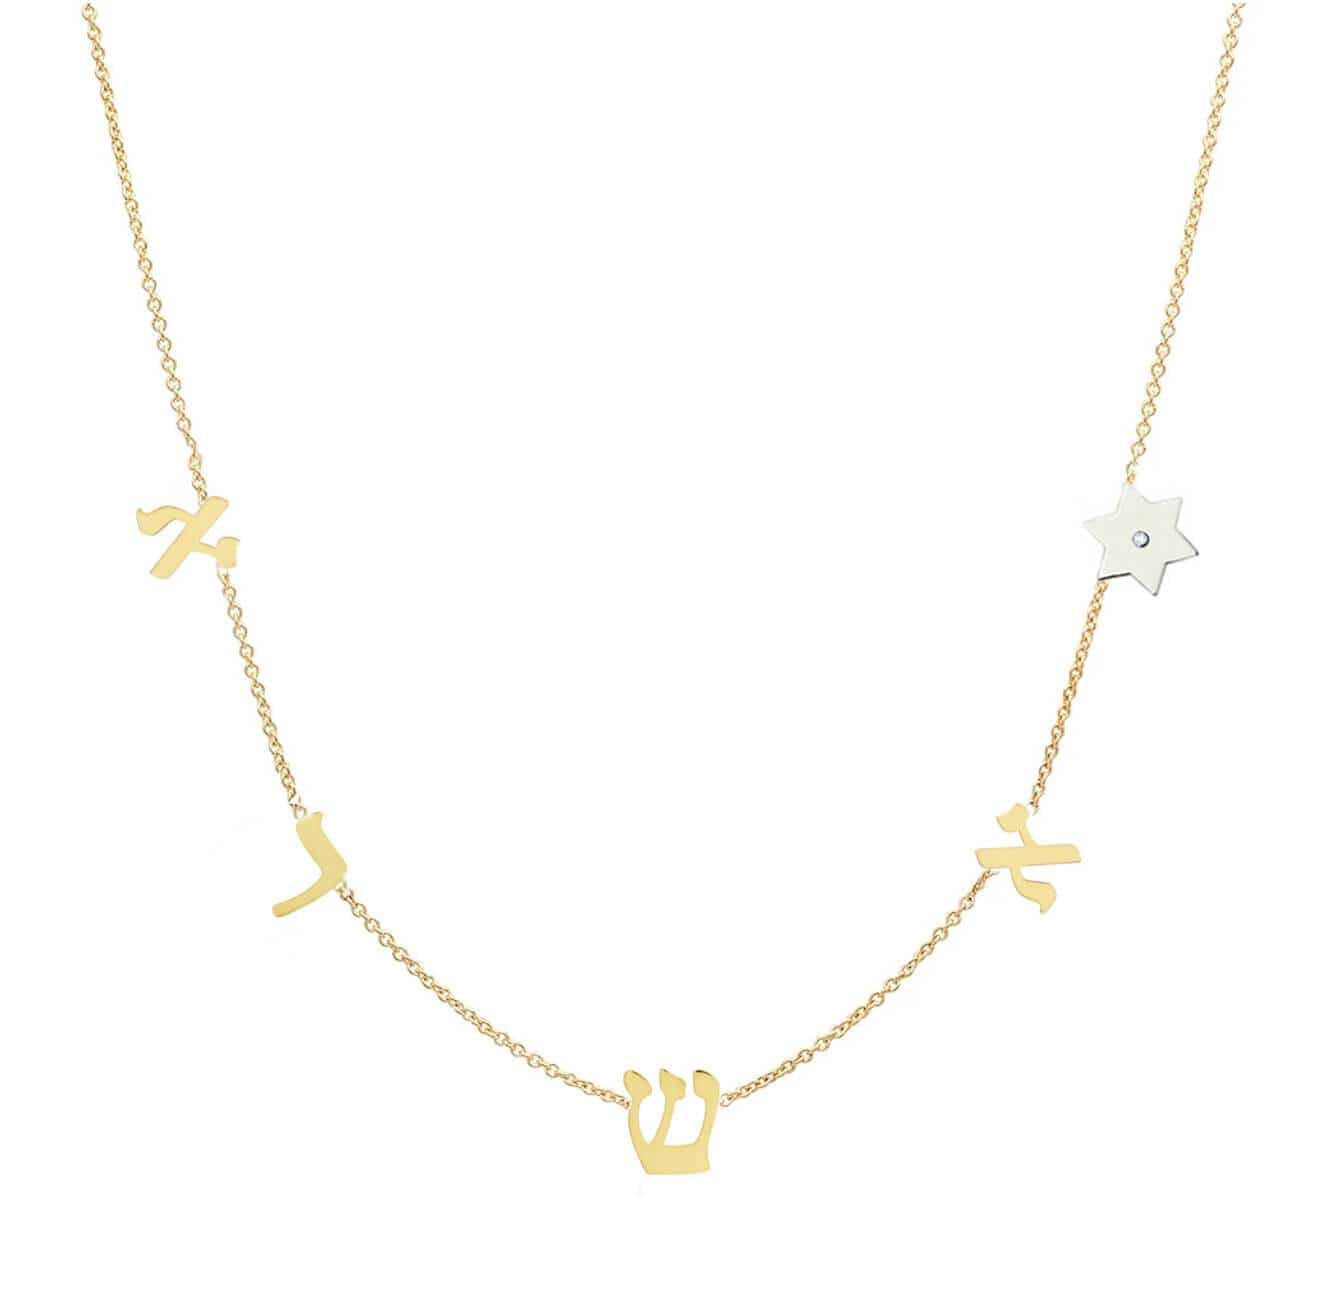 Miriam Merenfeld Jewelry Necklaces English or Hebrew Spaced Initials and Star of David Diamond Necklace - Sterling Silver, Gold Vermeil or Two-Tone